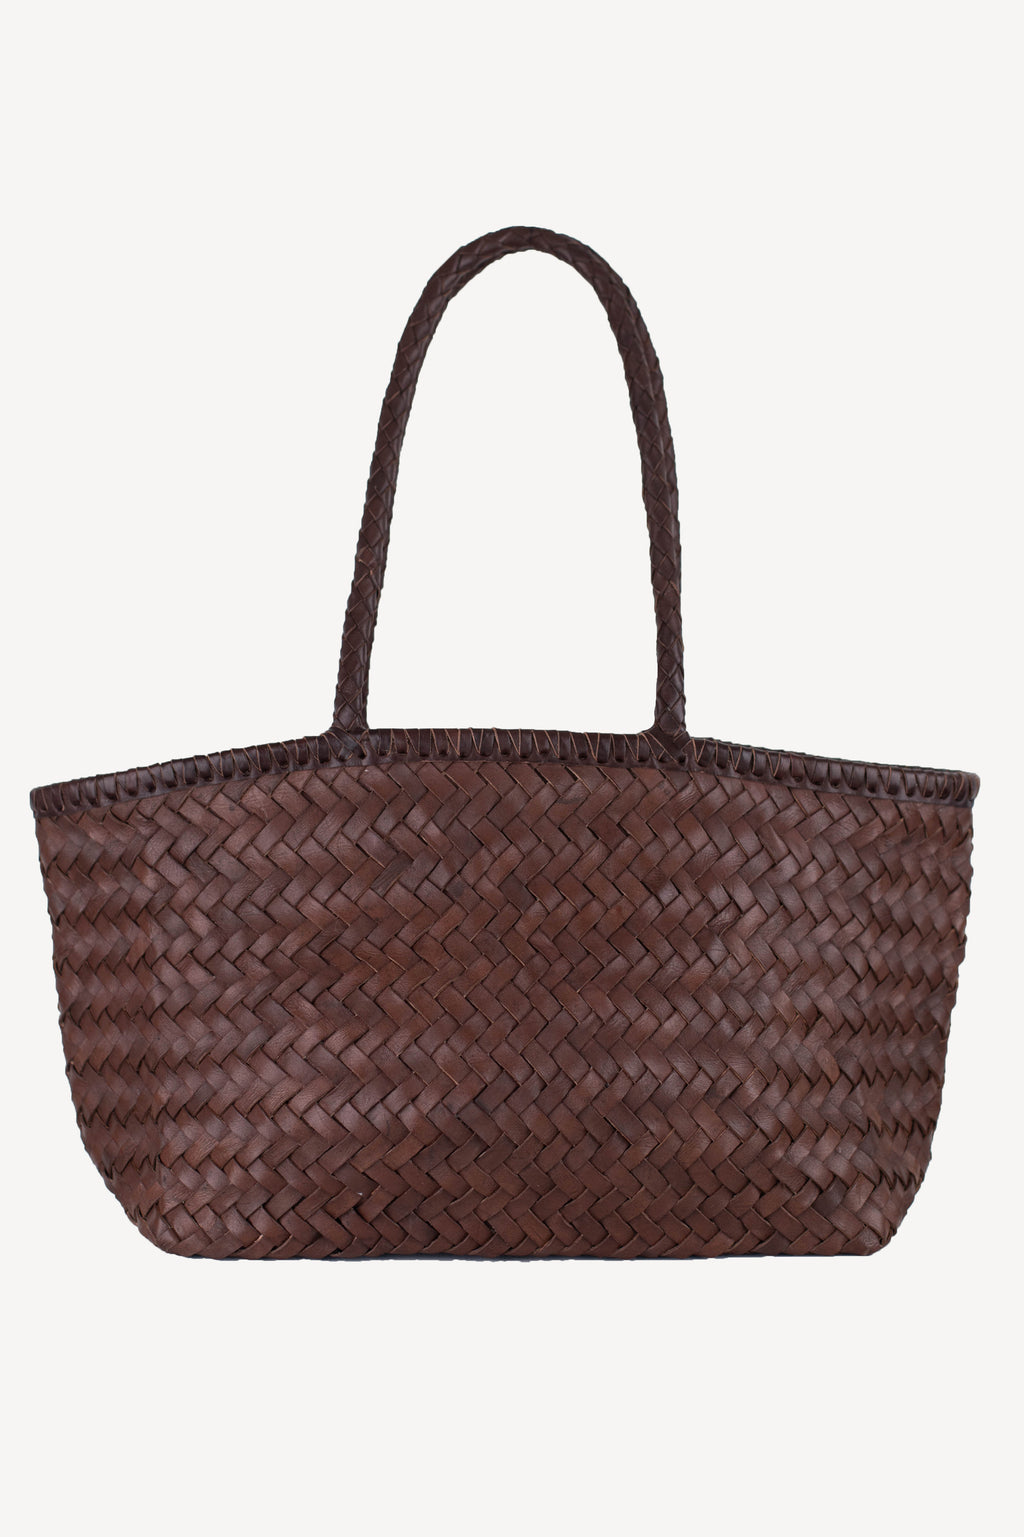 Large wide woven brown bag